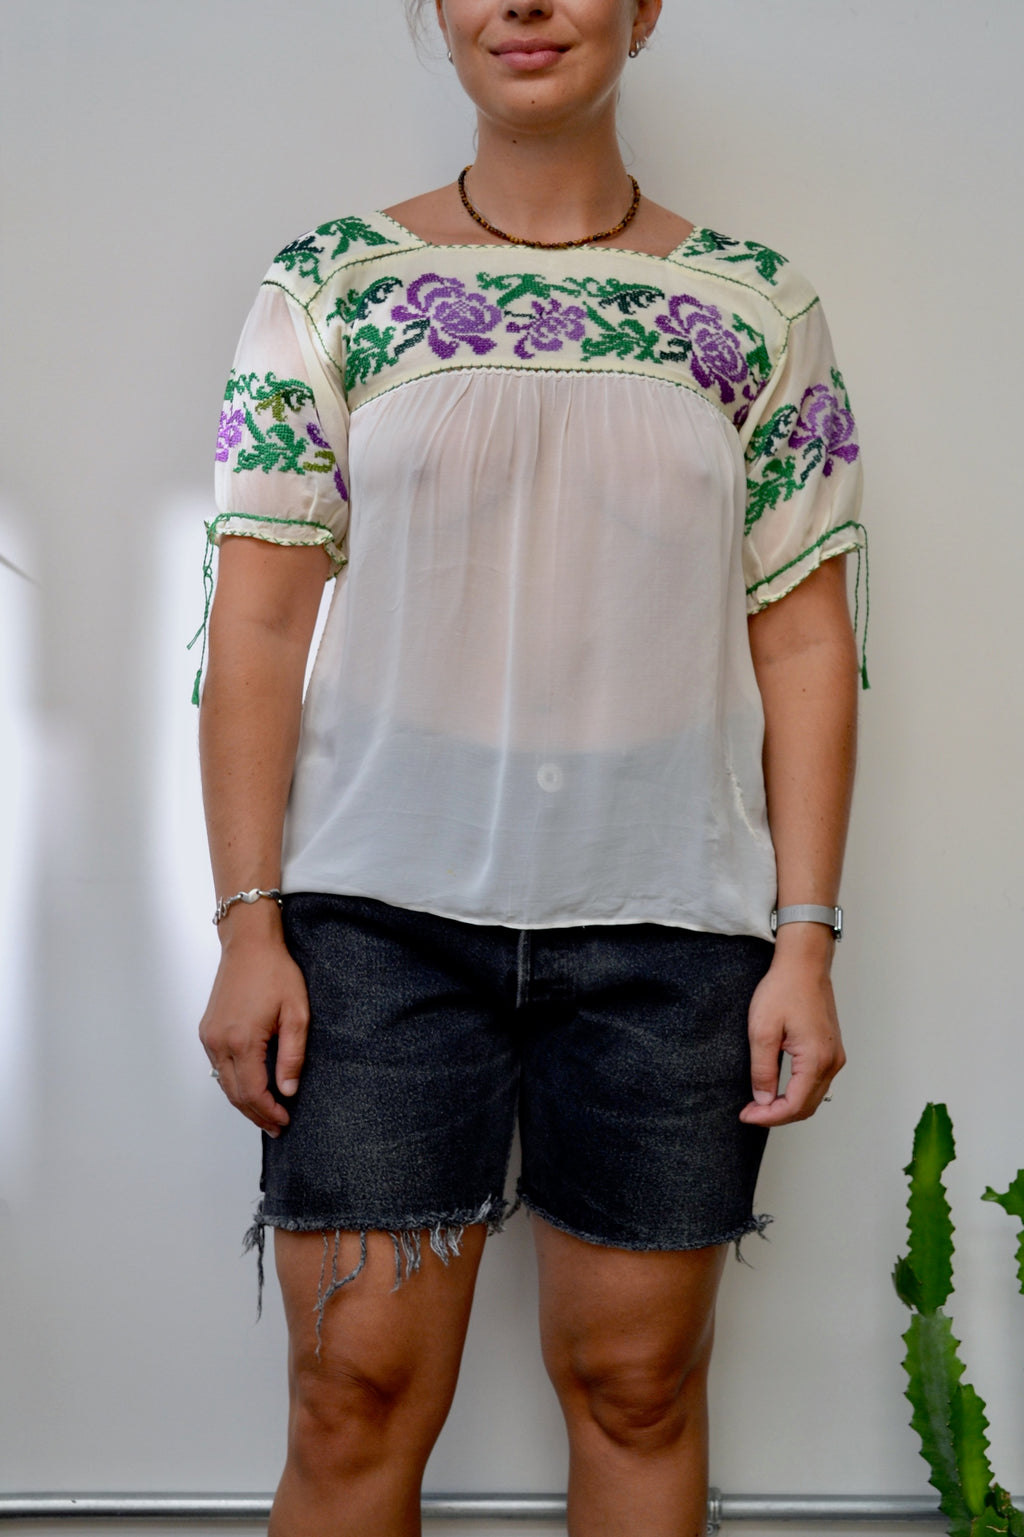 Vintage Embroidered Mexican Blouse